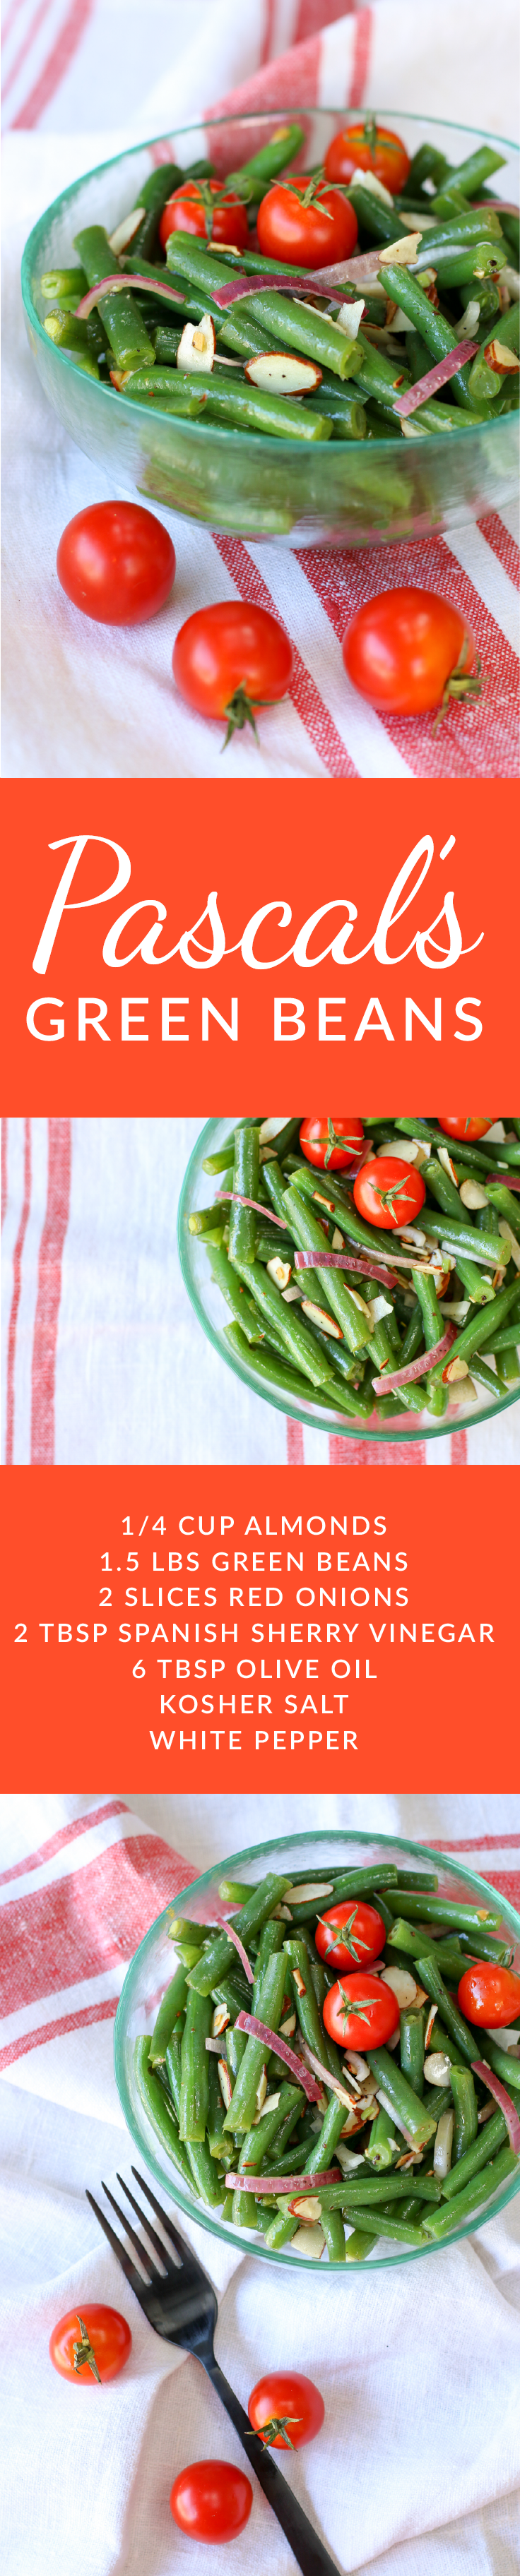 Crunchy, delicious, healthy and quick.These green beans are great last minute or prepared in advance. Perfect for home meals, potluck or picnics. 